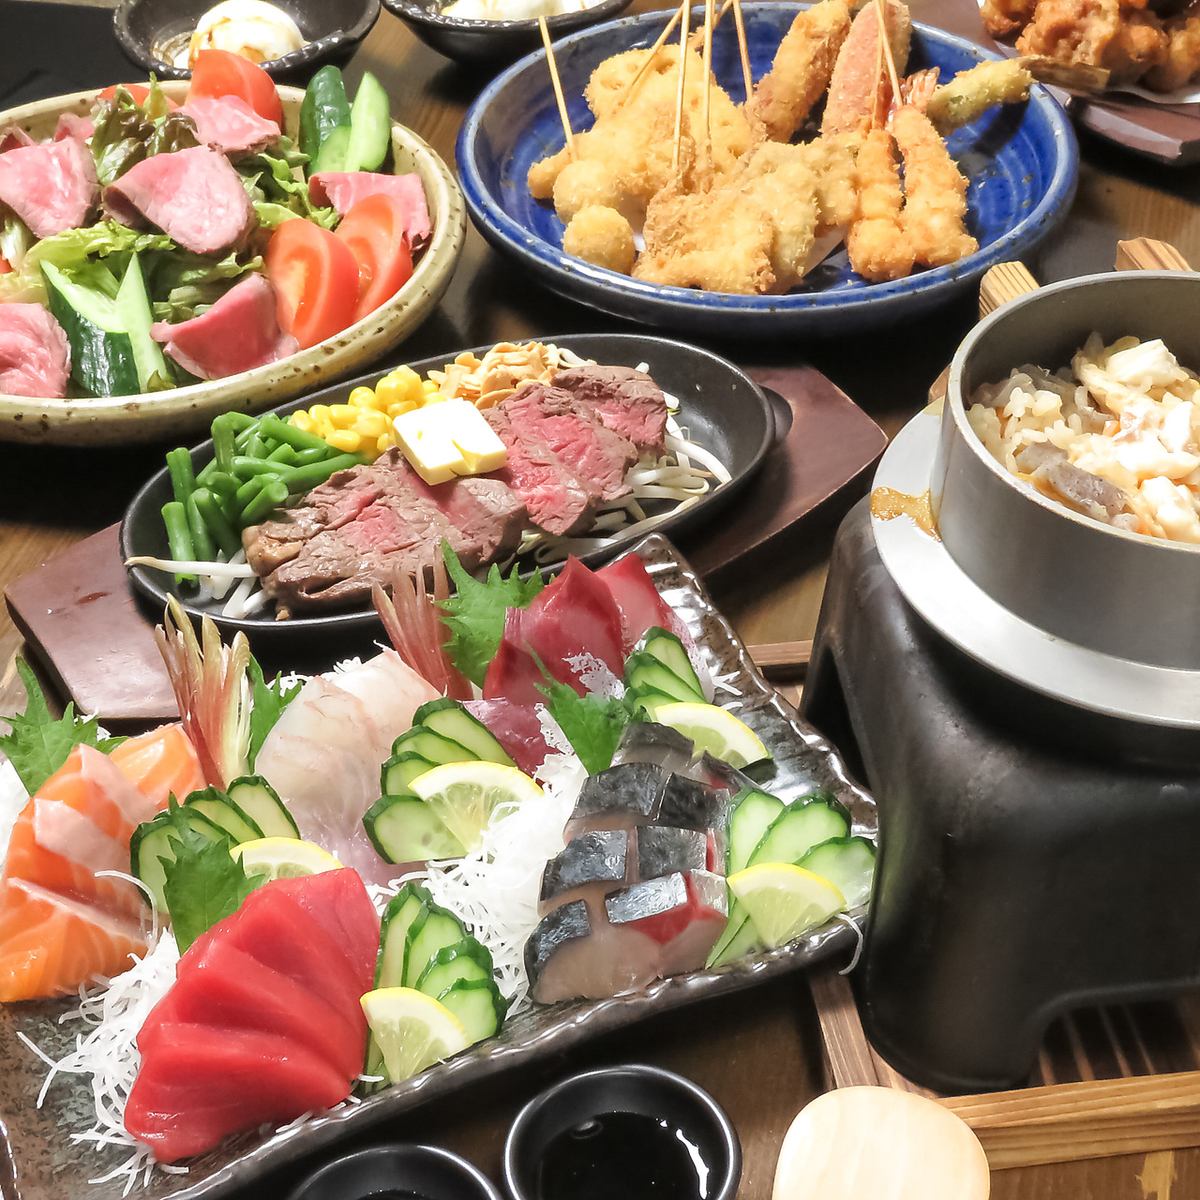 If you're looking for seafood in Esaka, head to our restaurant! We take pride in our freshness and prices! All-you-can-drink banquet course starts at 3,300 yen